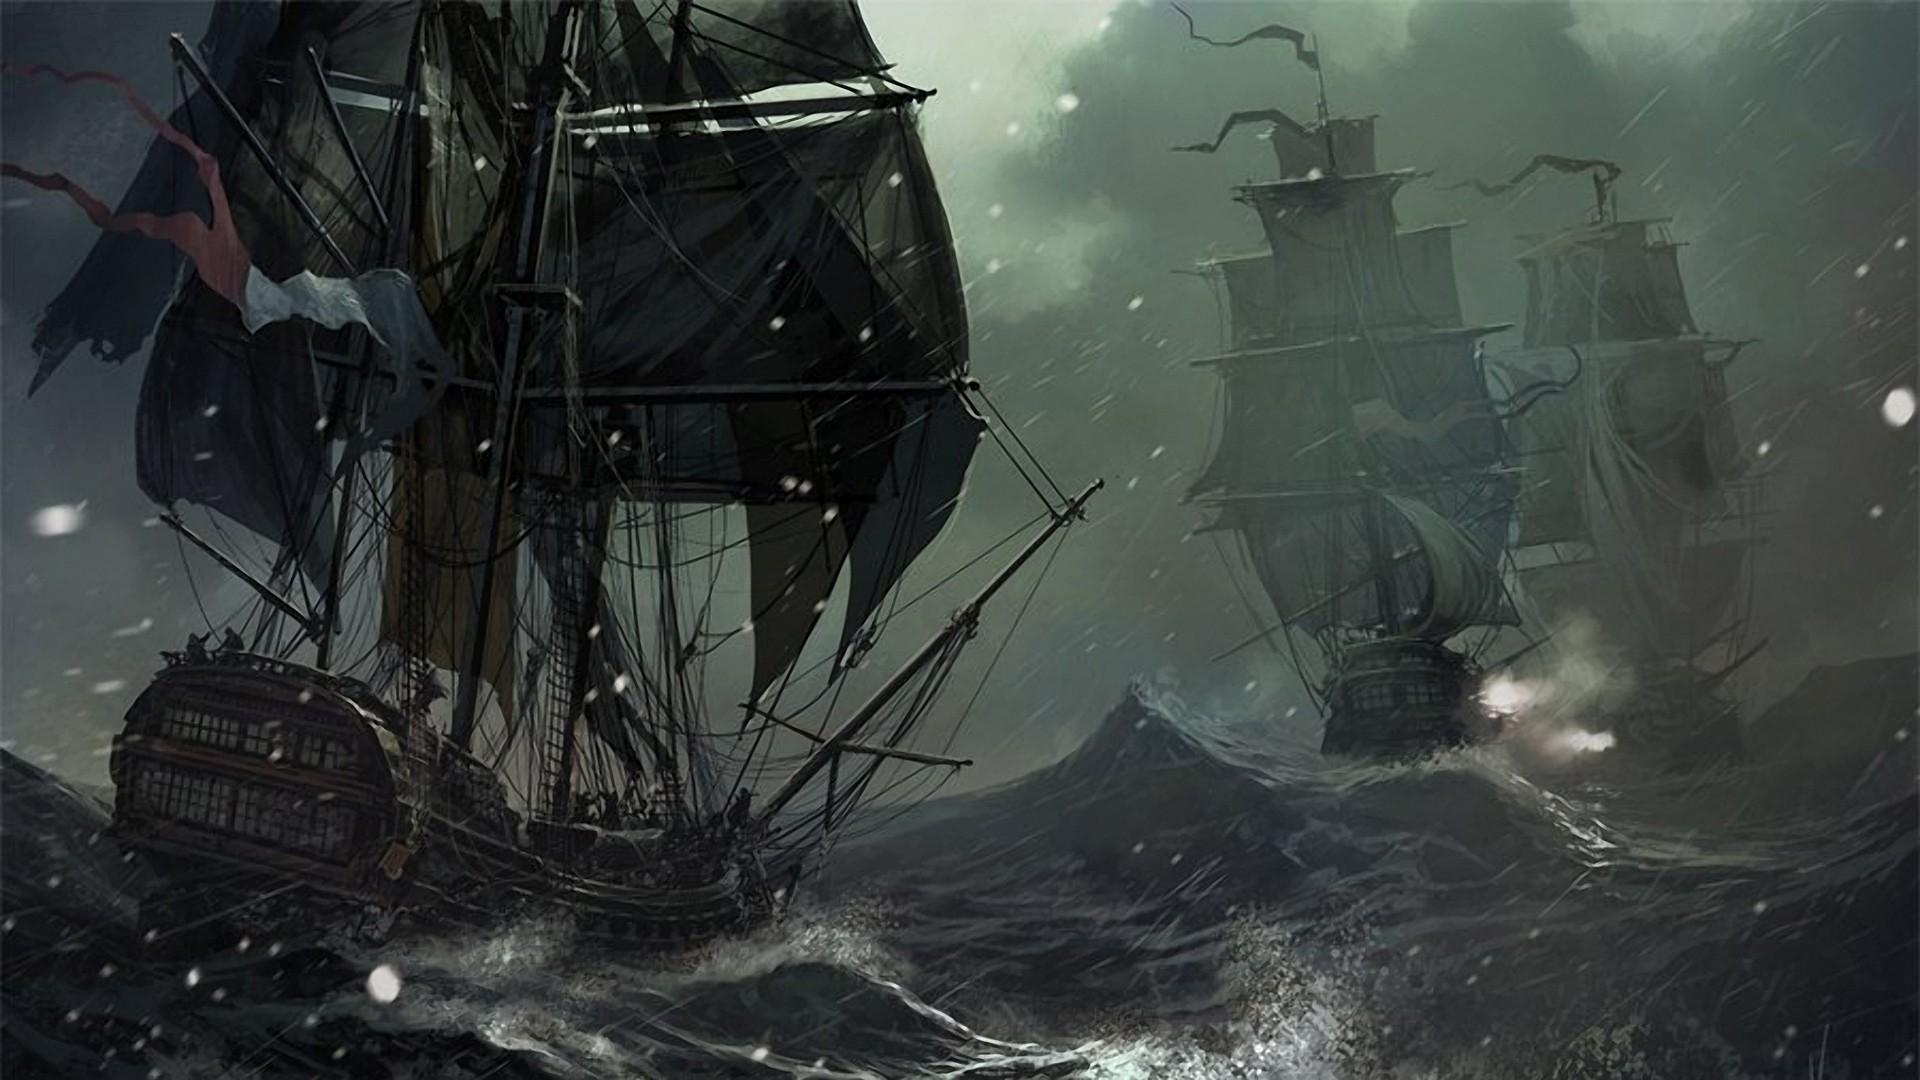 Top Ghost Ship Wallpaper 1920x1080 For Windows WTG305195